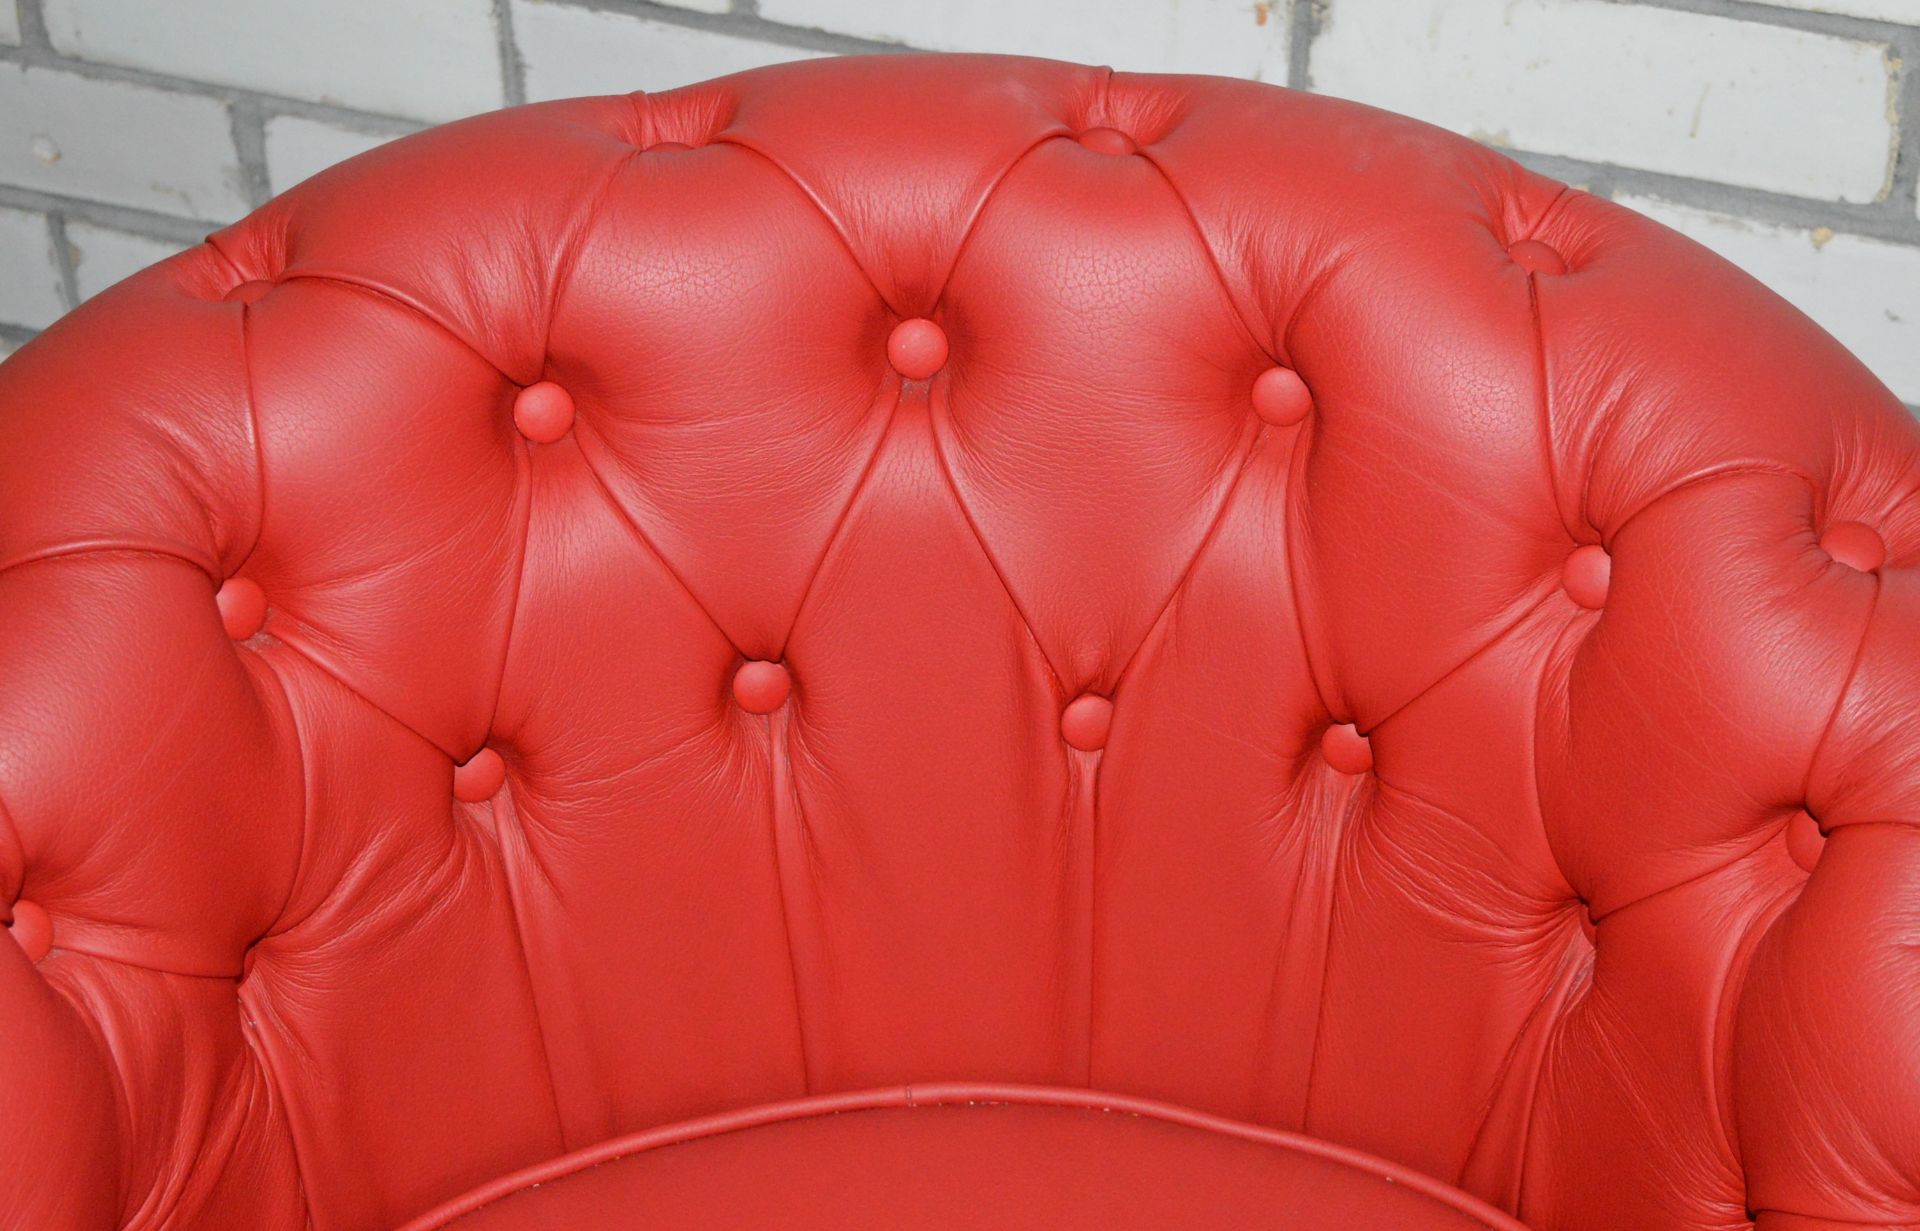 4 x Chesterfield Style Buttoned Back Red Leather Tub Chairs With Hardwood Legs Finished in an - Image 6 of 8